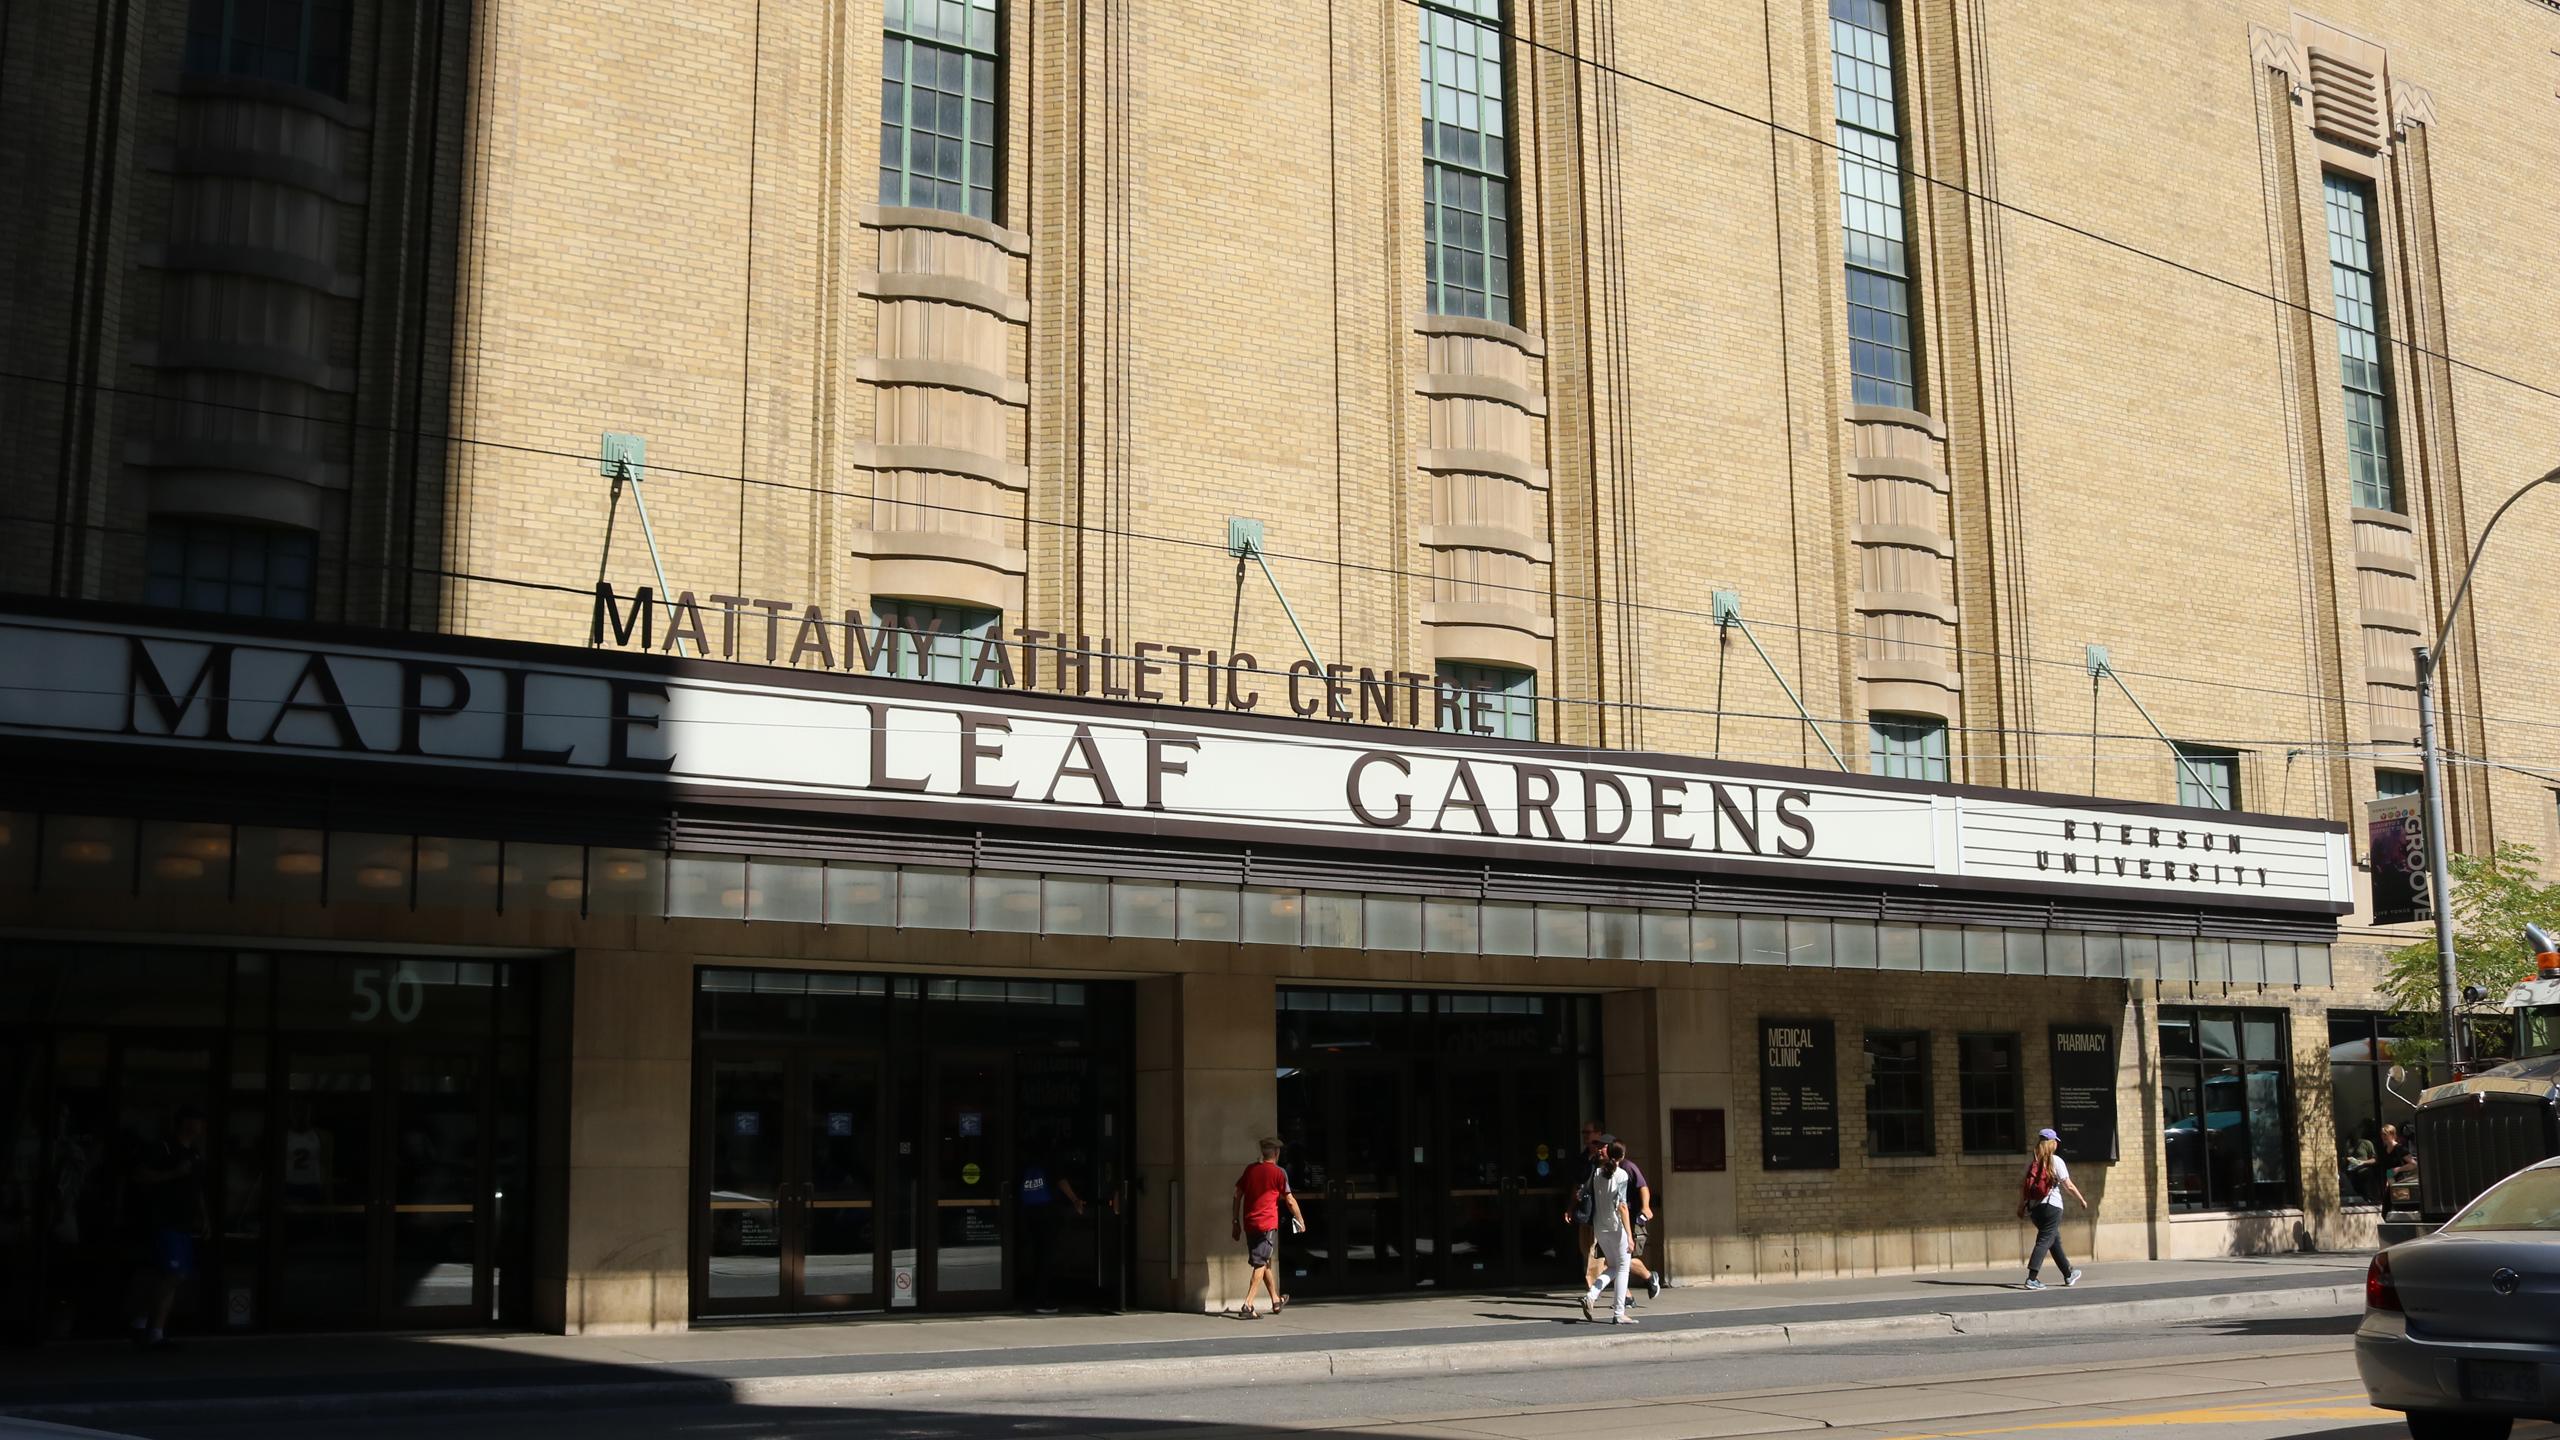 The Mattamy Athletic Centre (MAC) located at the Maple Leaf Gardens. Photo taken from street view.